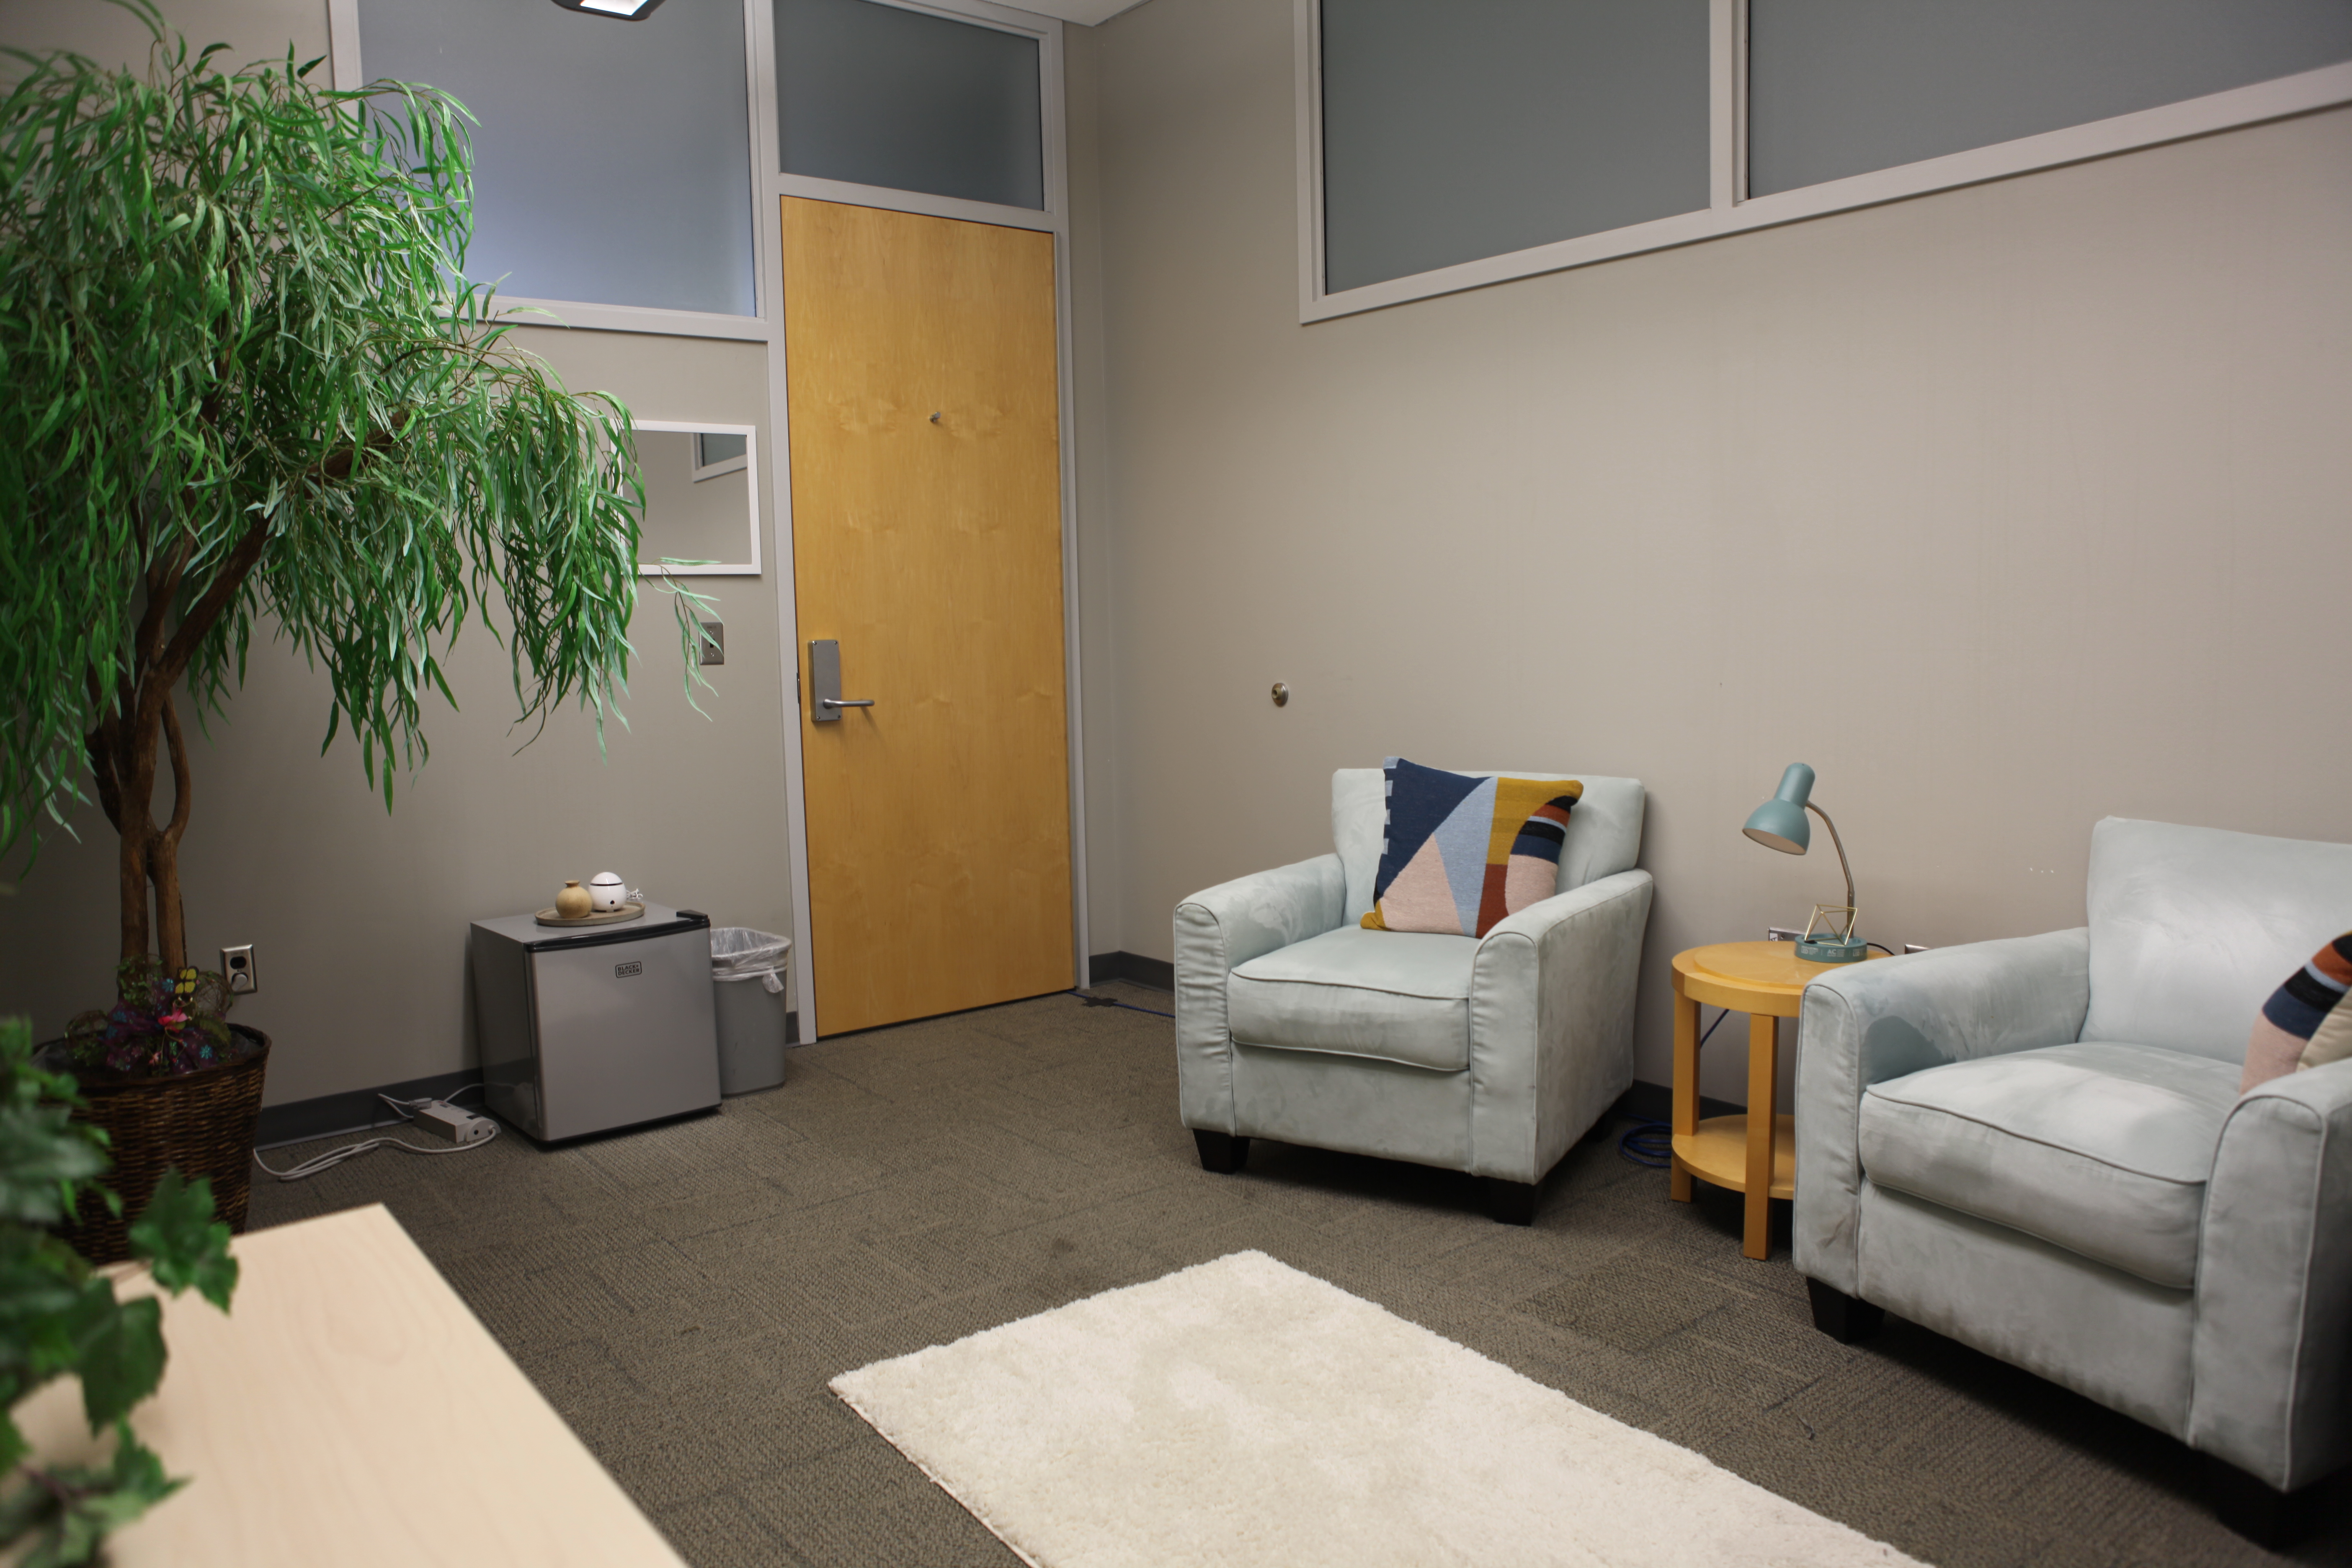 The NWC private office amenities shown include comfy a green "fake" tree, chairs, storage and a mini fridge. 